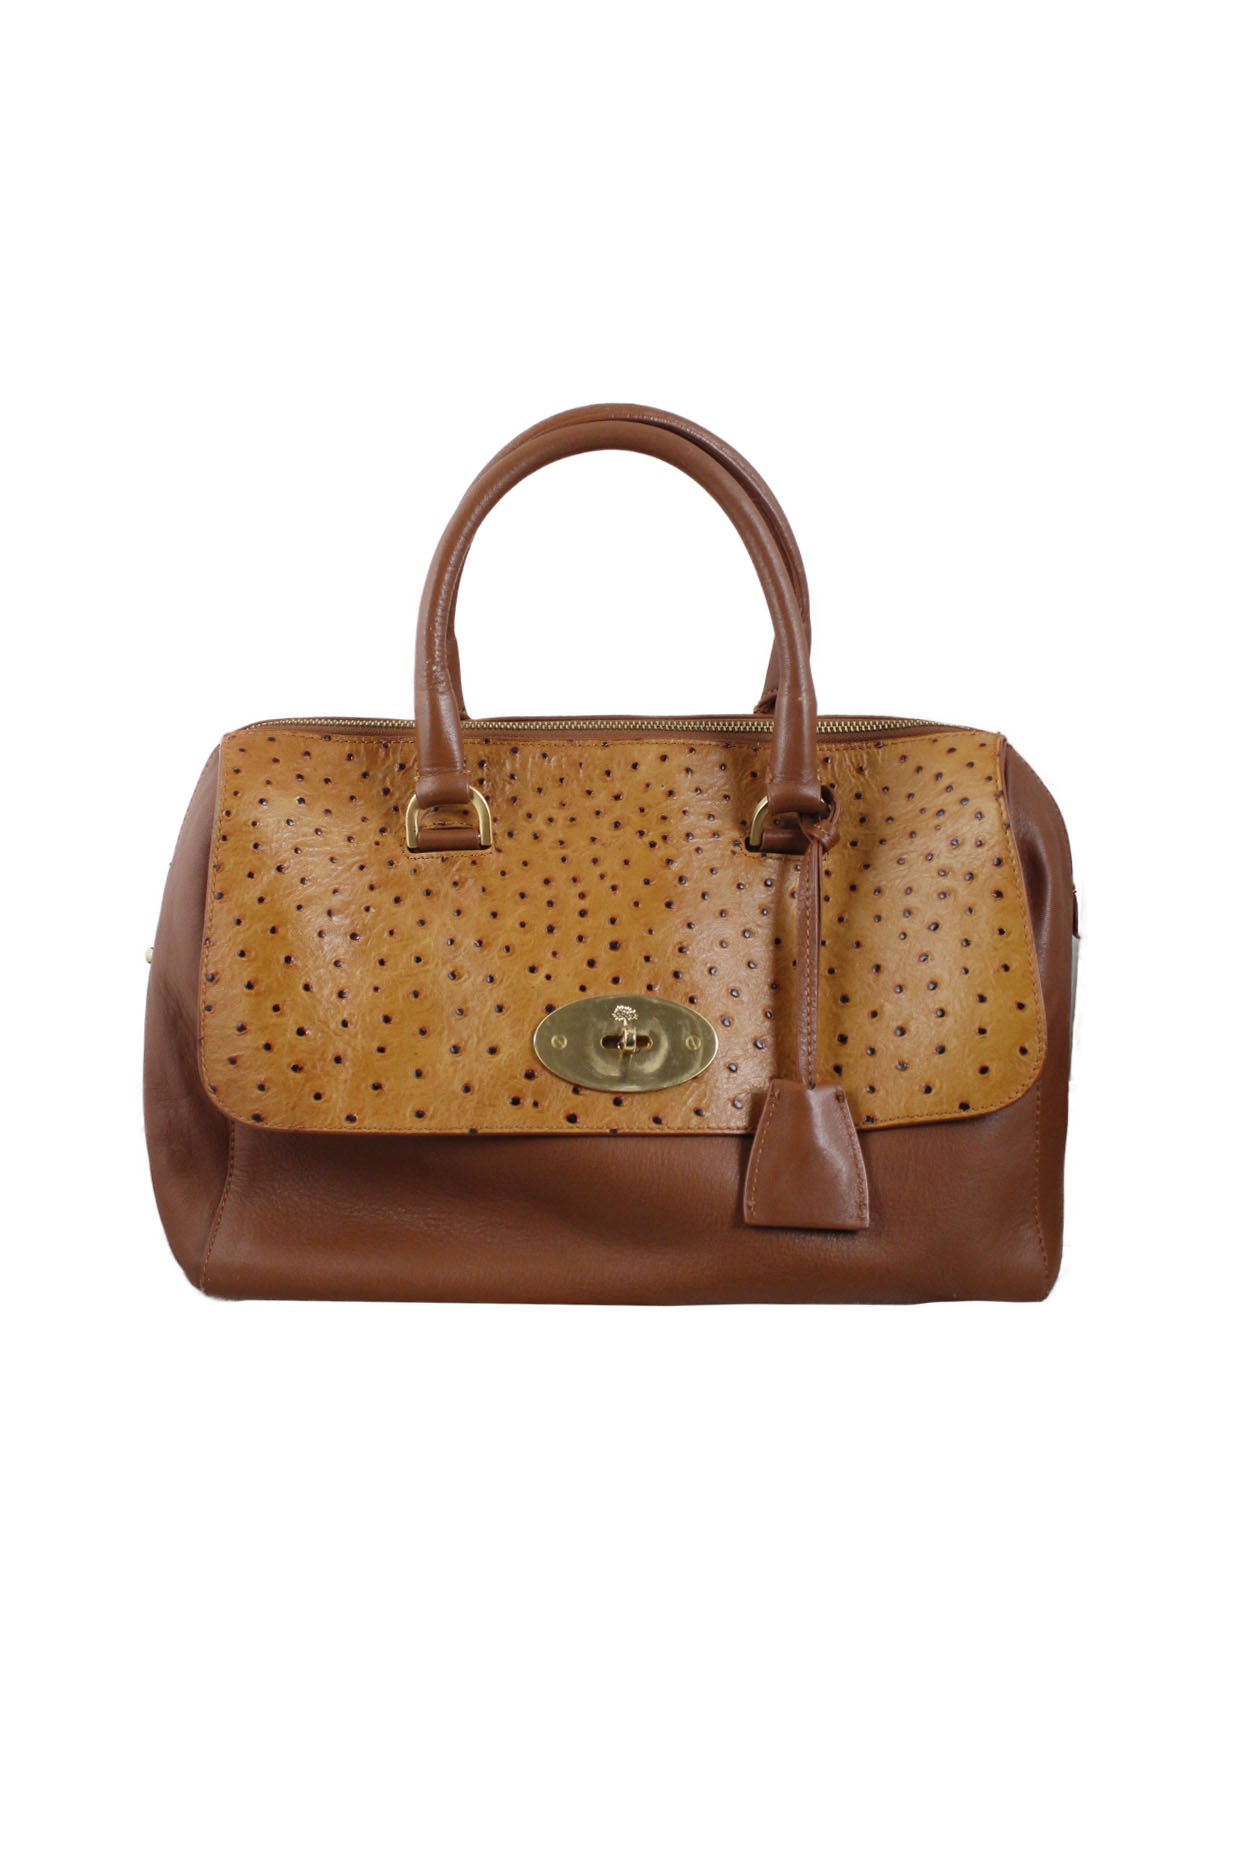 description: mulberry light brown ostrich leather handbag. features double handed, gold-tone metal hardware throughout, ostrich-leather front flap with turn lock closure, interior slit pocket, and interior zip closure pocket. comes with lock charm and dust bag. 